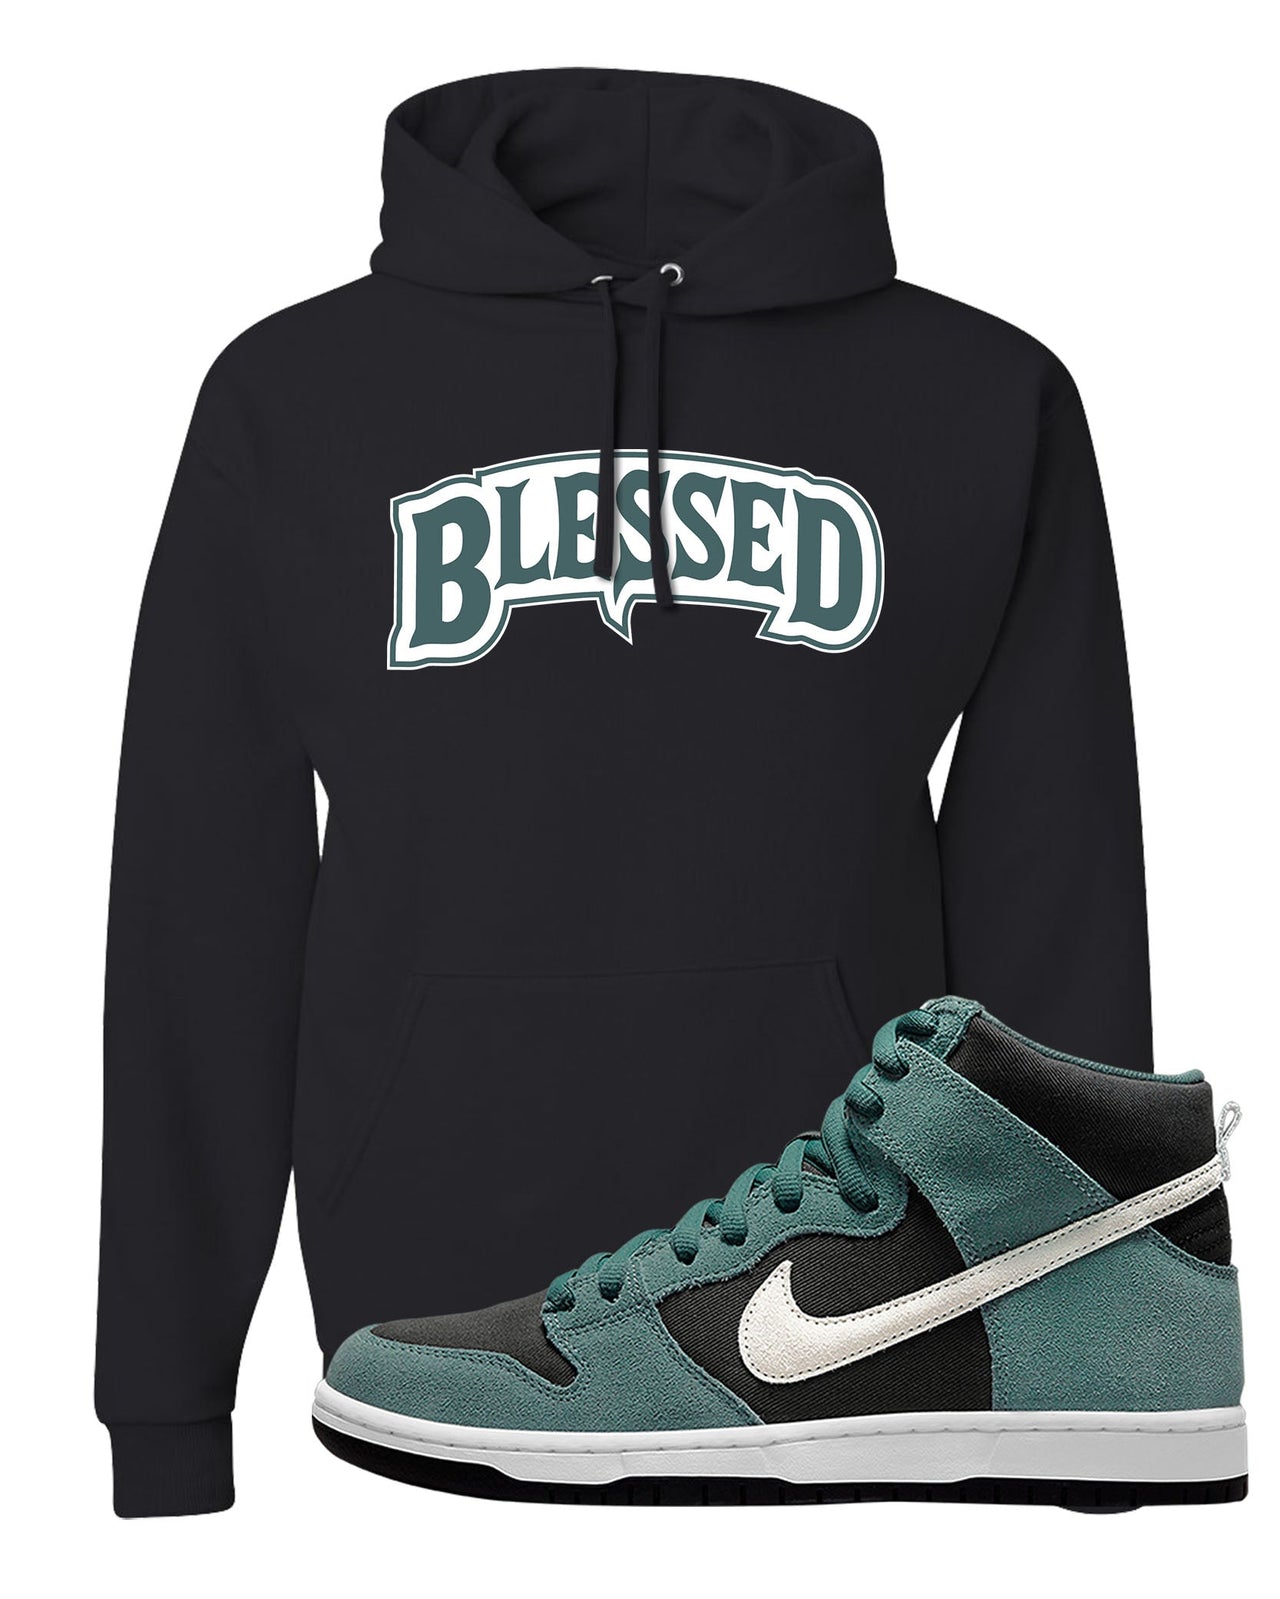 Green Suede High Dunks Hoodie | Blessed Arch, Black